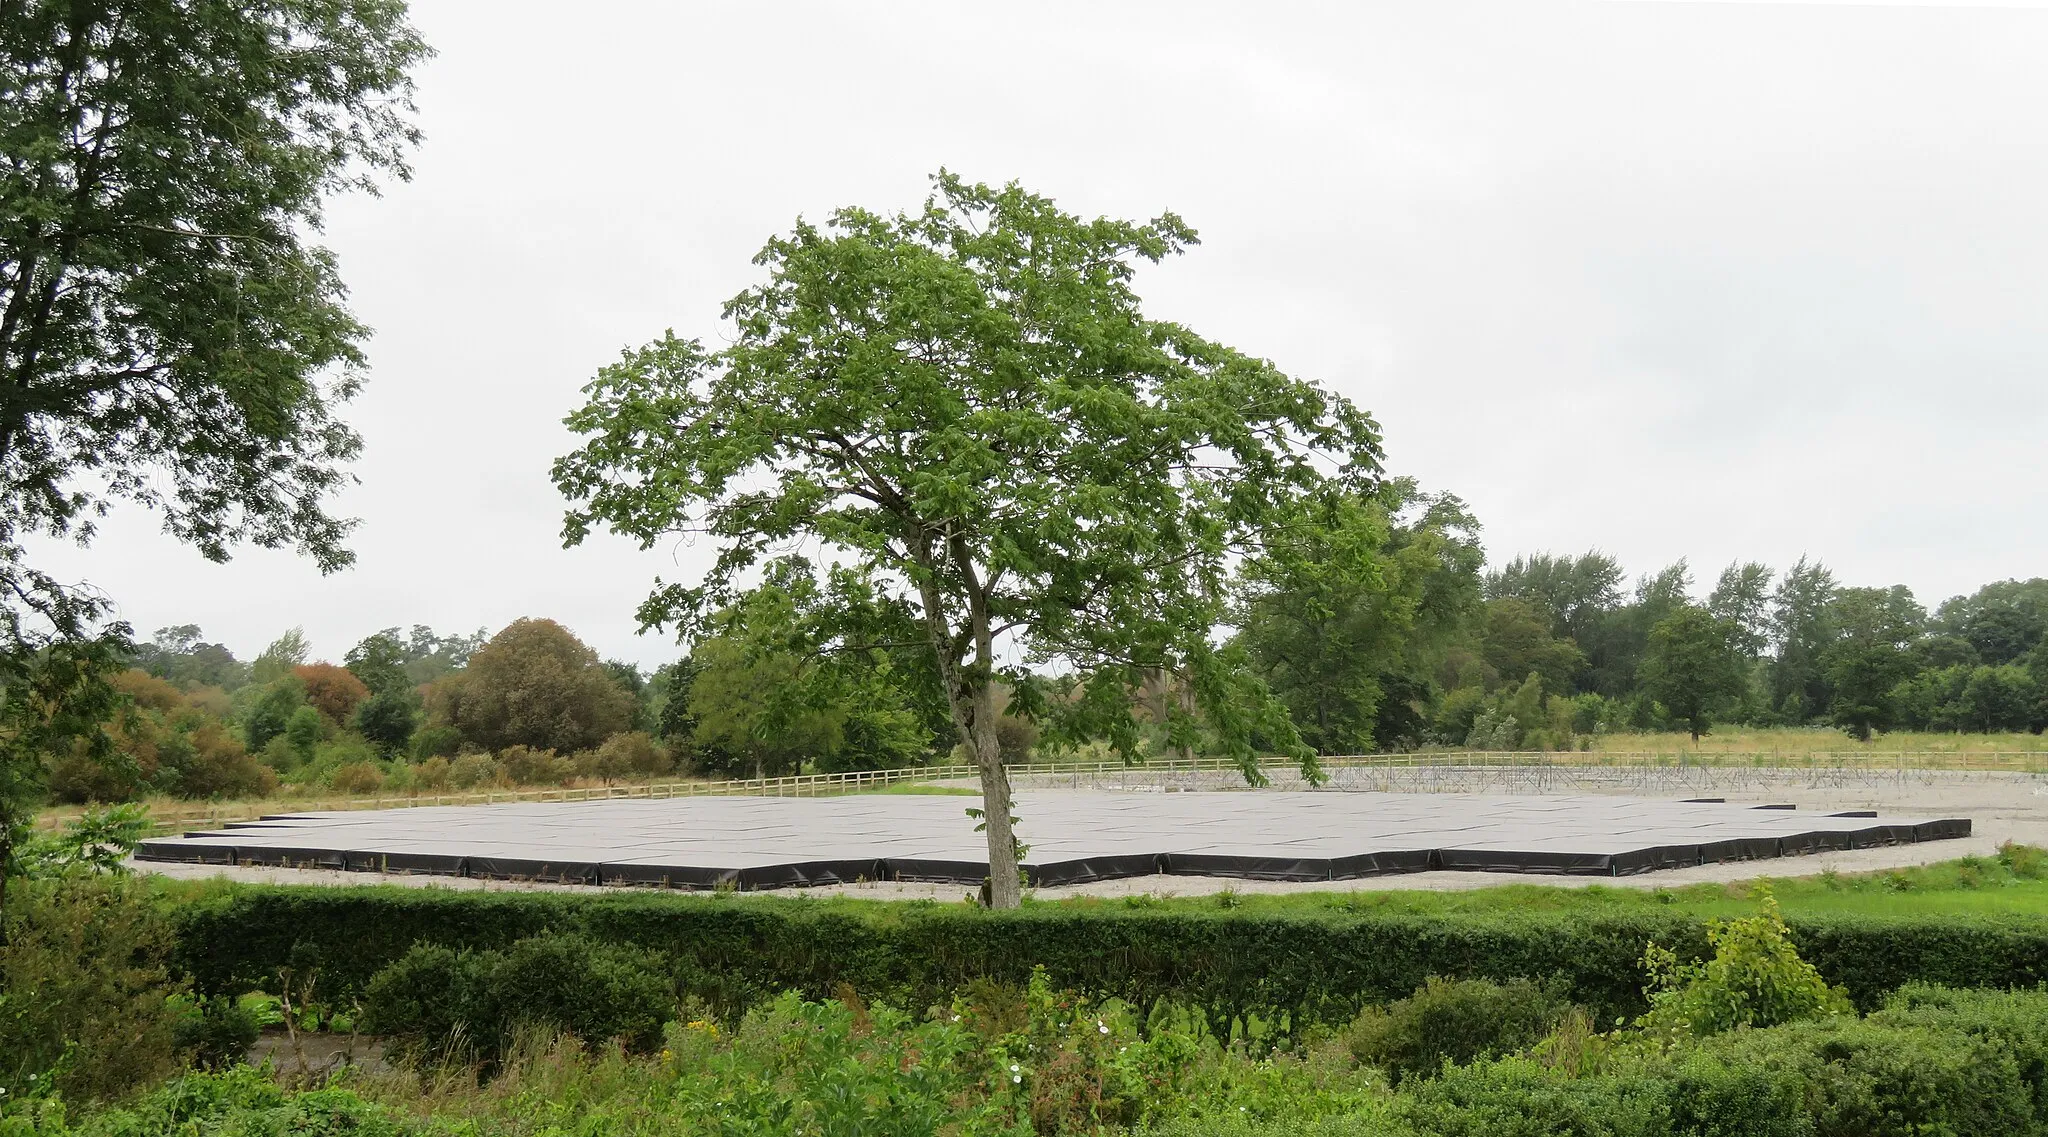 Photo showing: The Irish Low-Frequency Array (I-LOFAR) at Birr Castle in Ireland is a radio telescope that observes the universe at low radio frequencies during the day and night. It is part of the largest telescope in the world, with telescope stations in the array stretching across Europe between Ireland and Poland. This effectively gives the combined virtual telescope a continent-sized baseline aperture of almost 2,000 km. In this location there are 96 high-band antenna assemblies (110–240 MHz) contained within the large, black mosaic of tiles in the foreground, and 96 low-band dipole antenna assemblies (10–90 MHz) - the array of poles resembling tall sewing pins in the background held in place by ground anchors, or guy wires; visually, the low-band array resembles a swarm of tripods. Within these assemblies are around 3,000 antenna units.  The data from this and the other telescopes in the LOFAR array are sent by high-bandwidth fibre optic cables to Groningen in the Netherlands where they are integrated and analysed by an IBM Blue Gene/P supercomputer.